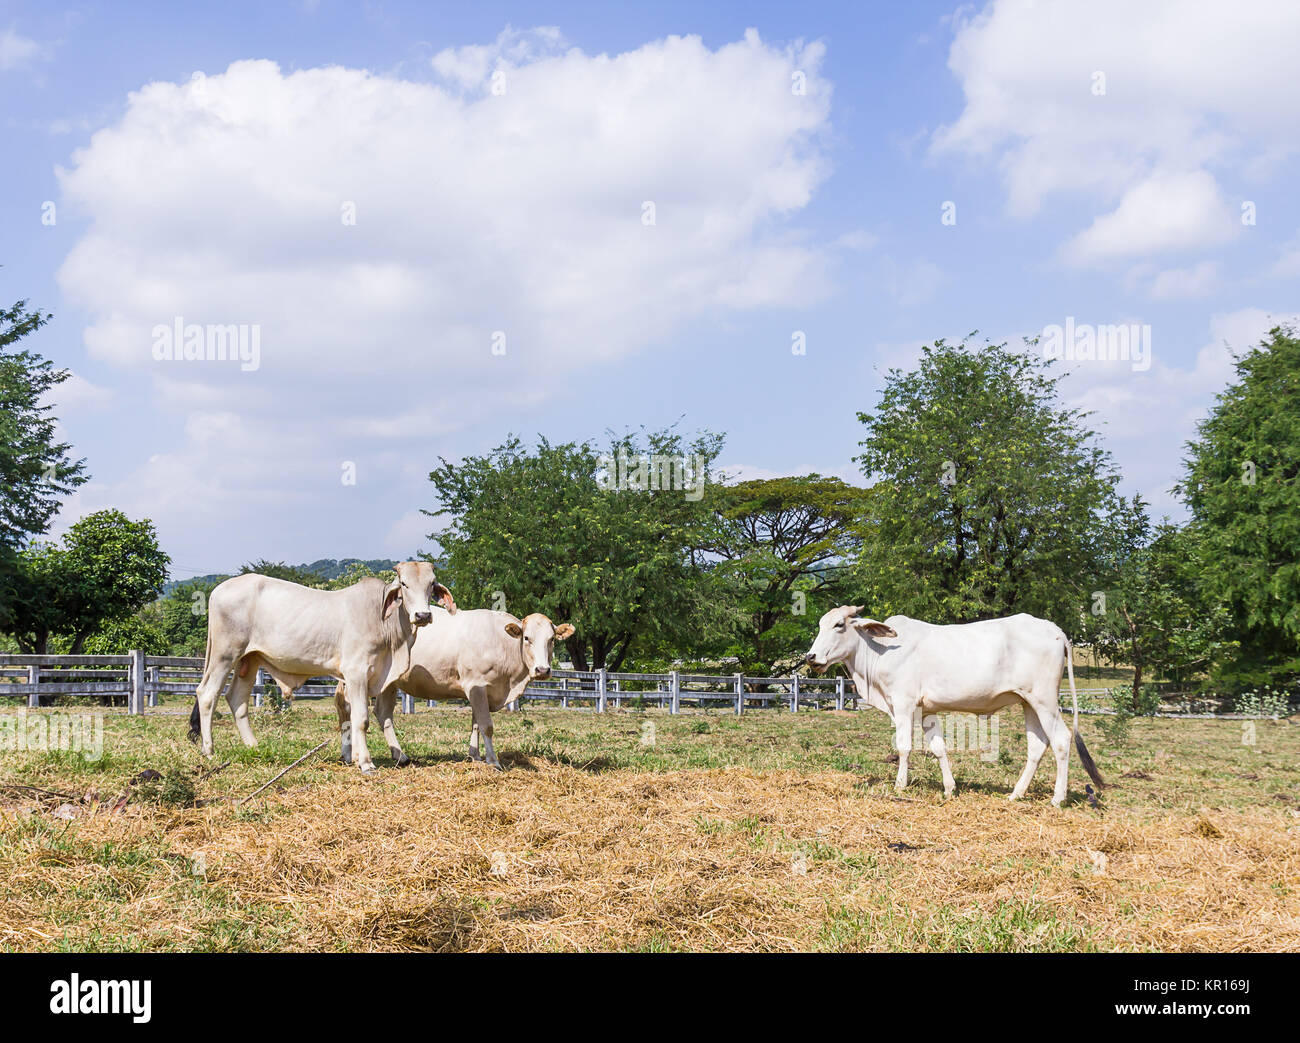 Cow standing in farm Banque D'Images